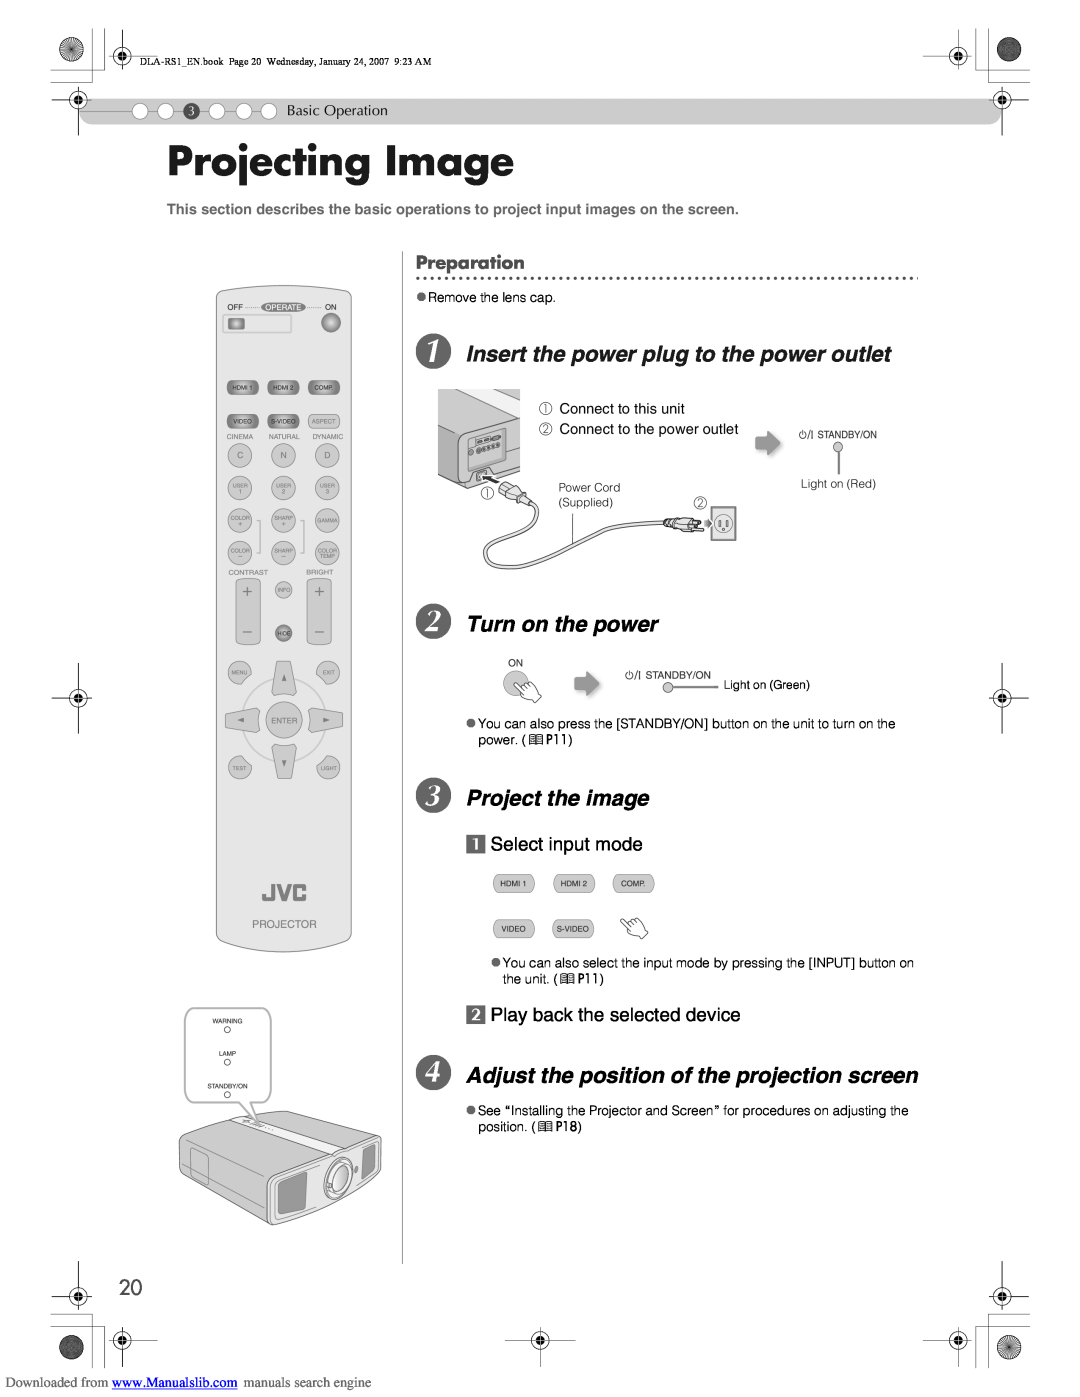 JVC DLA-RS1 manual Projecting Image, A Insert the power plug to the power outlet, B Turn on the power, C Project the image 